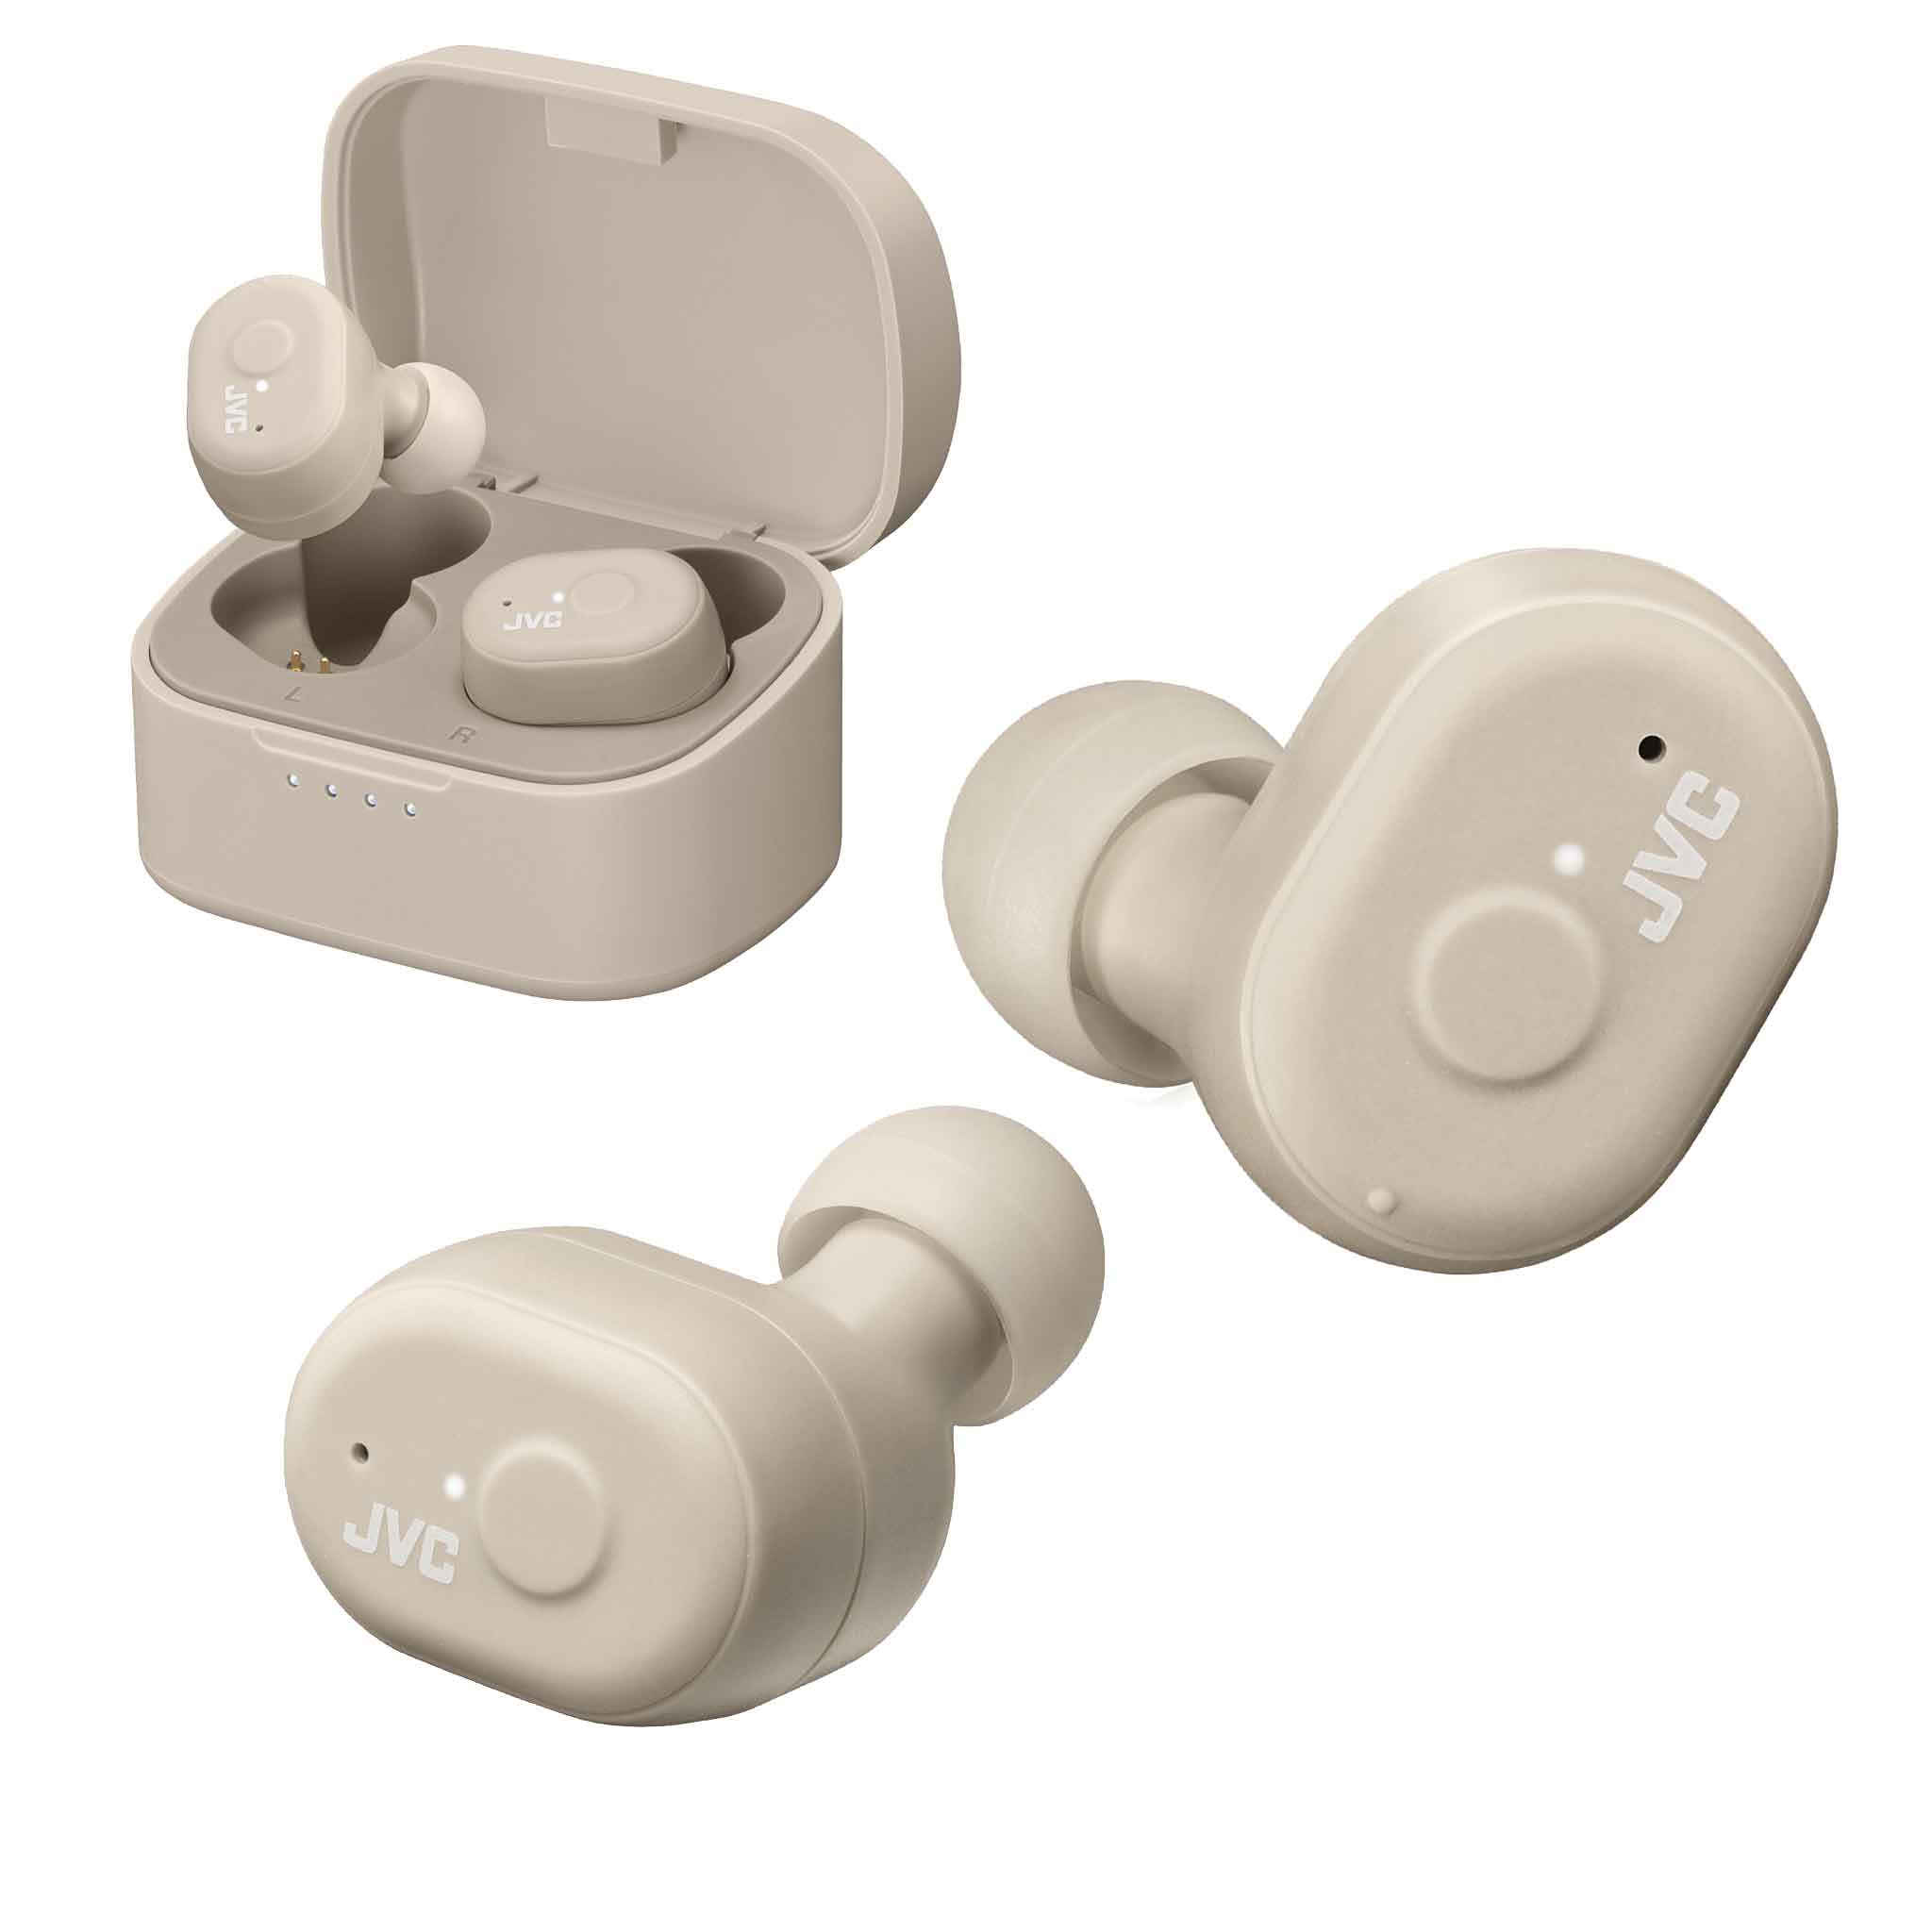 HA-A11T-T Wireless Earbuds and Case